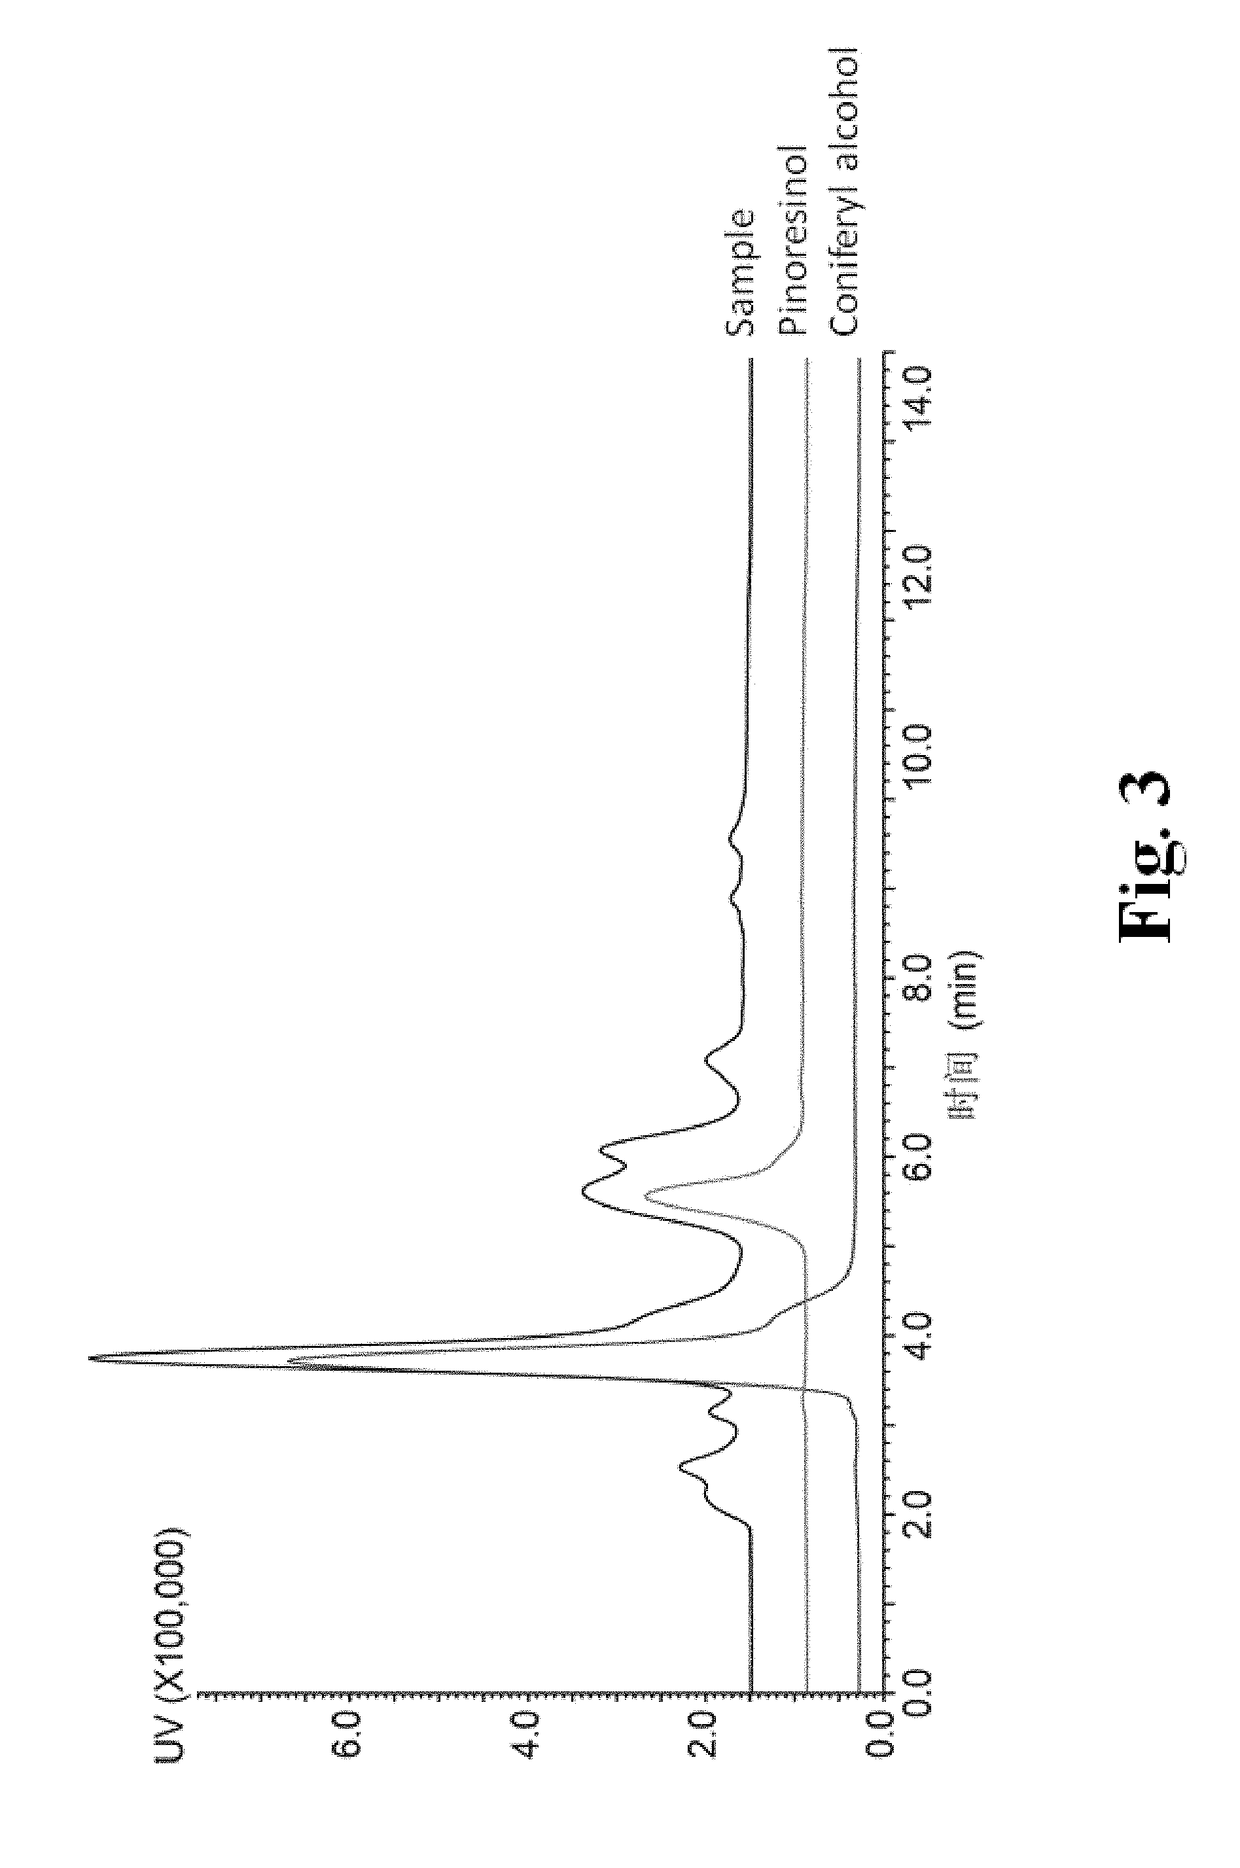 Method for High-efficiency Production of Pinoresinol Using an H2O2 Auto-scavenging Cascade